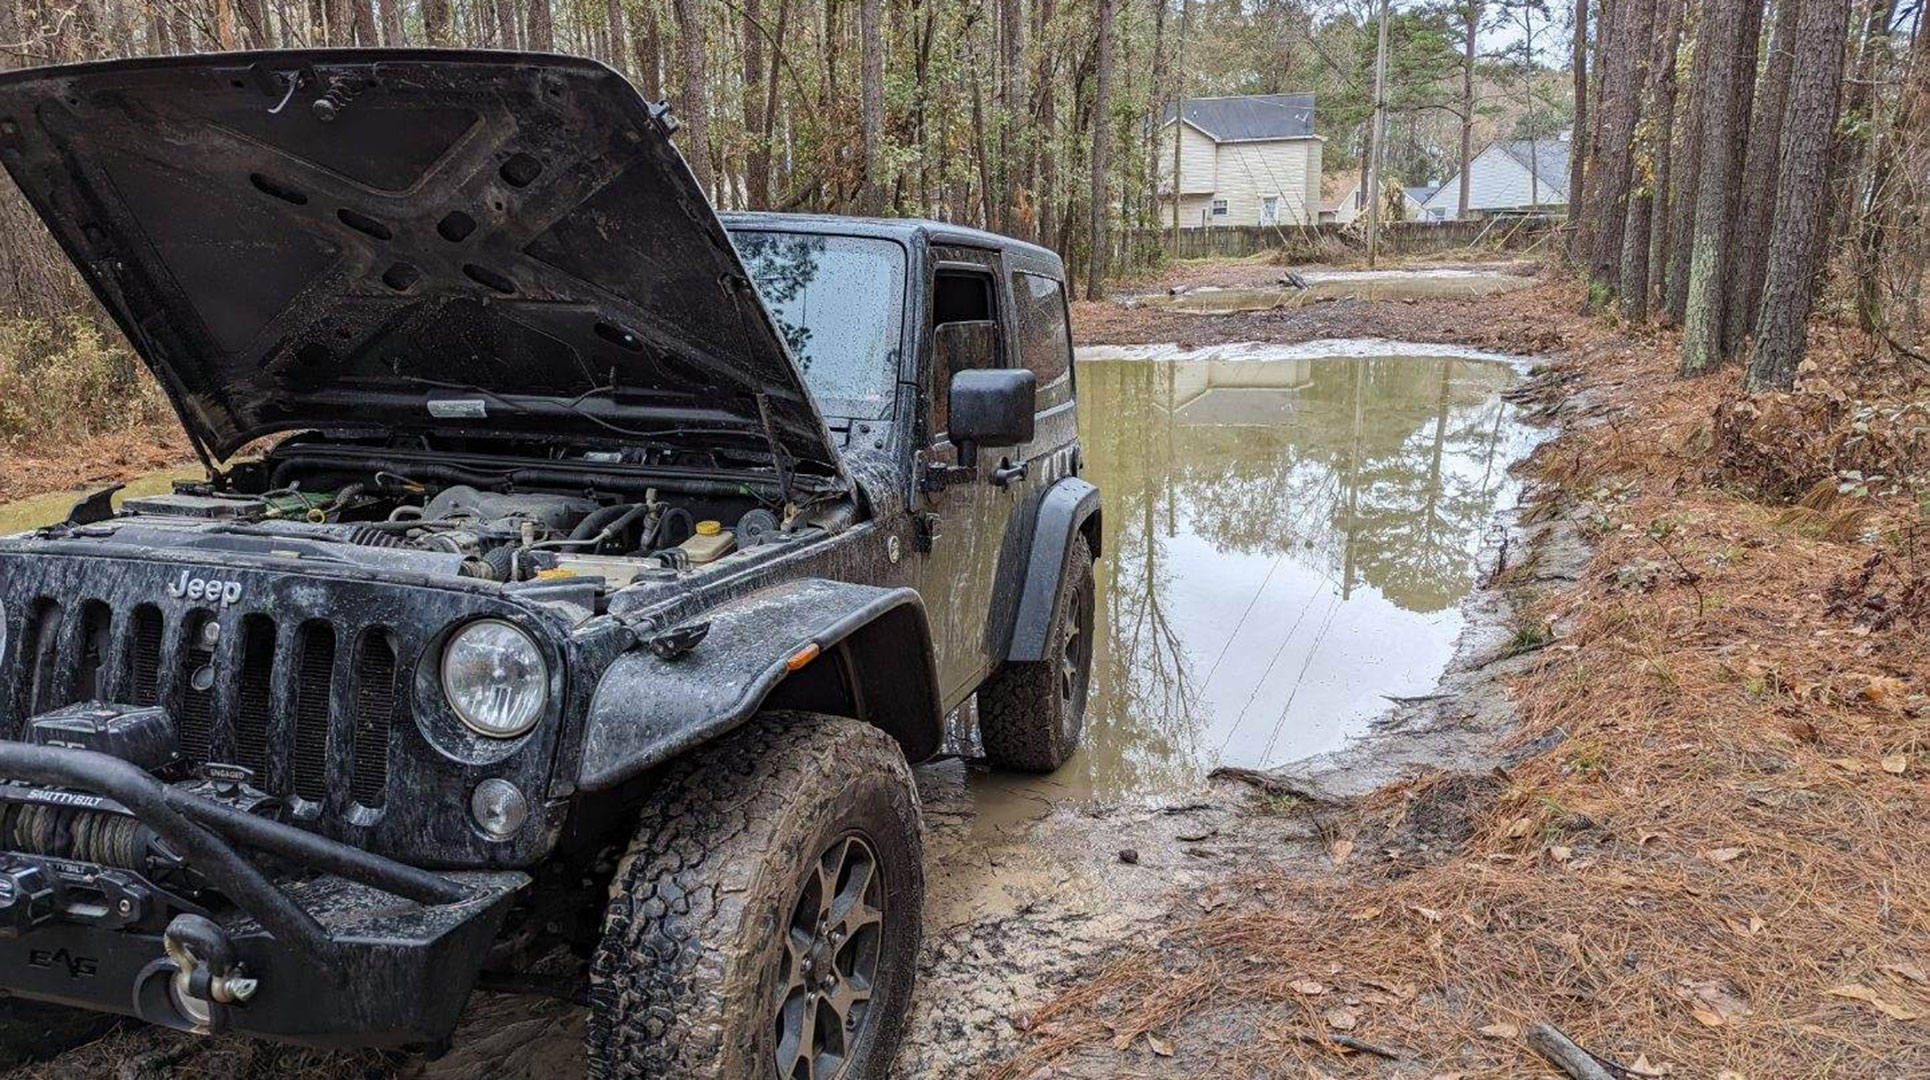 Jeep Wrangler took on water